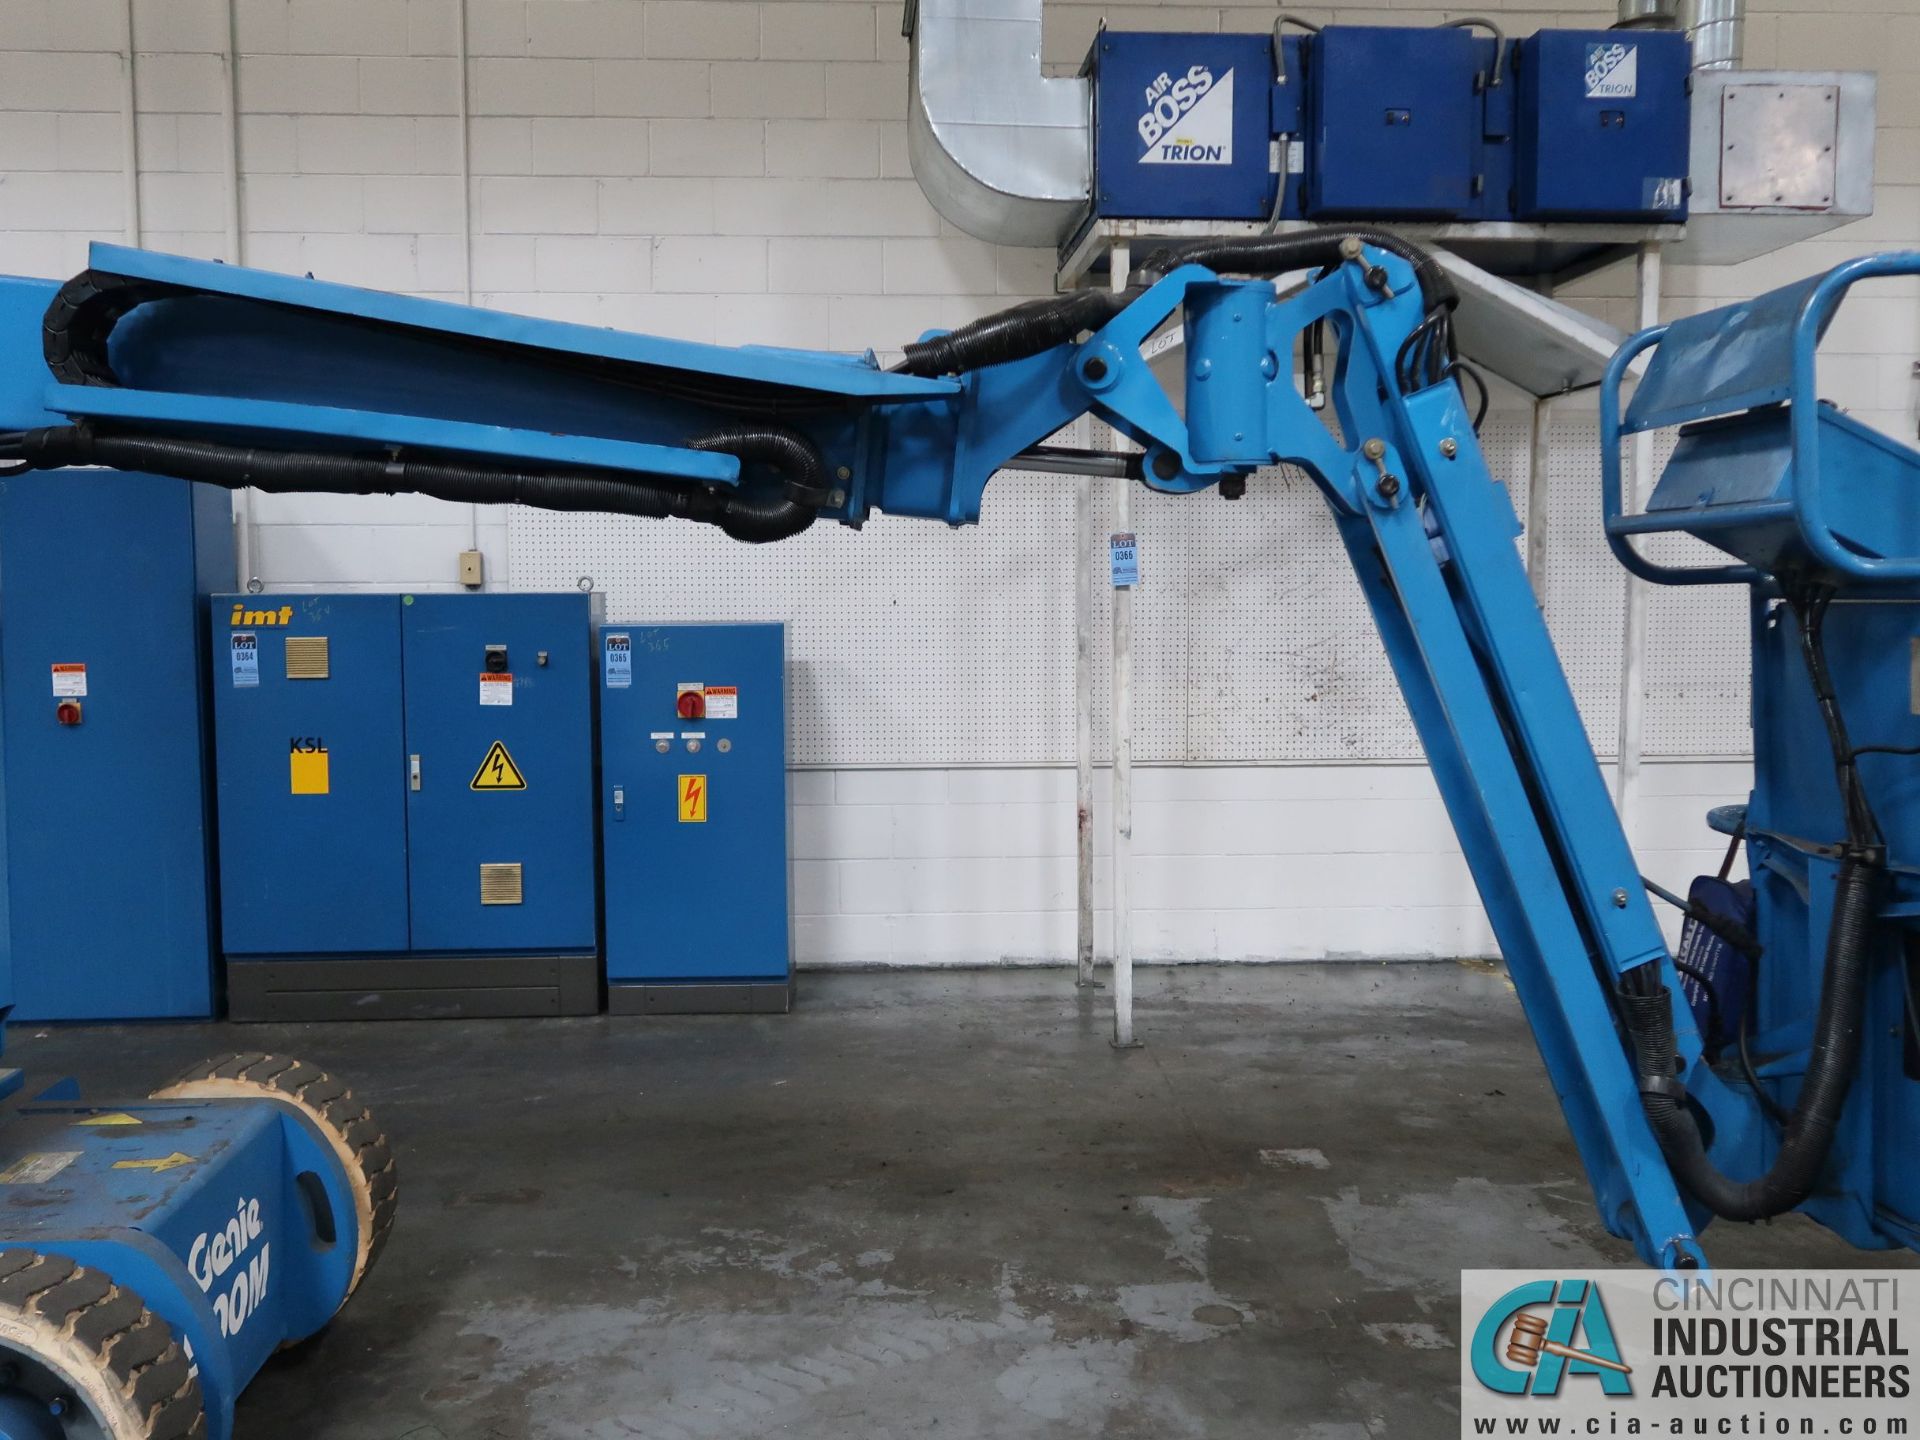 36' GENIE MODEL Z-30/20N ARTICULATED ELECTRIC BOOM LIFT; S/N 23ONO6-8304, 36' LIFT HEIGHT, 500 LB. - Image 8 of 9